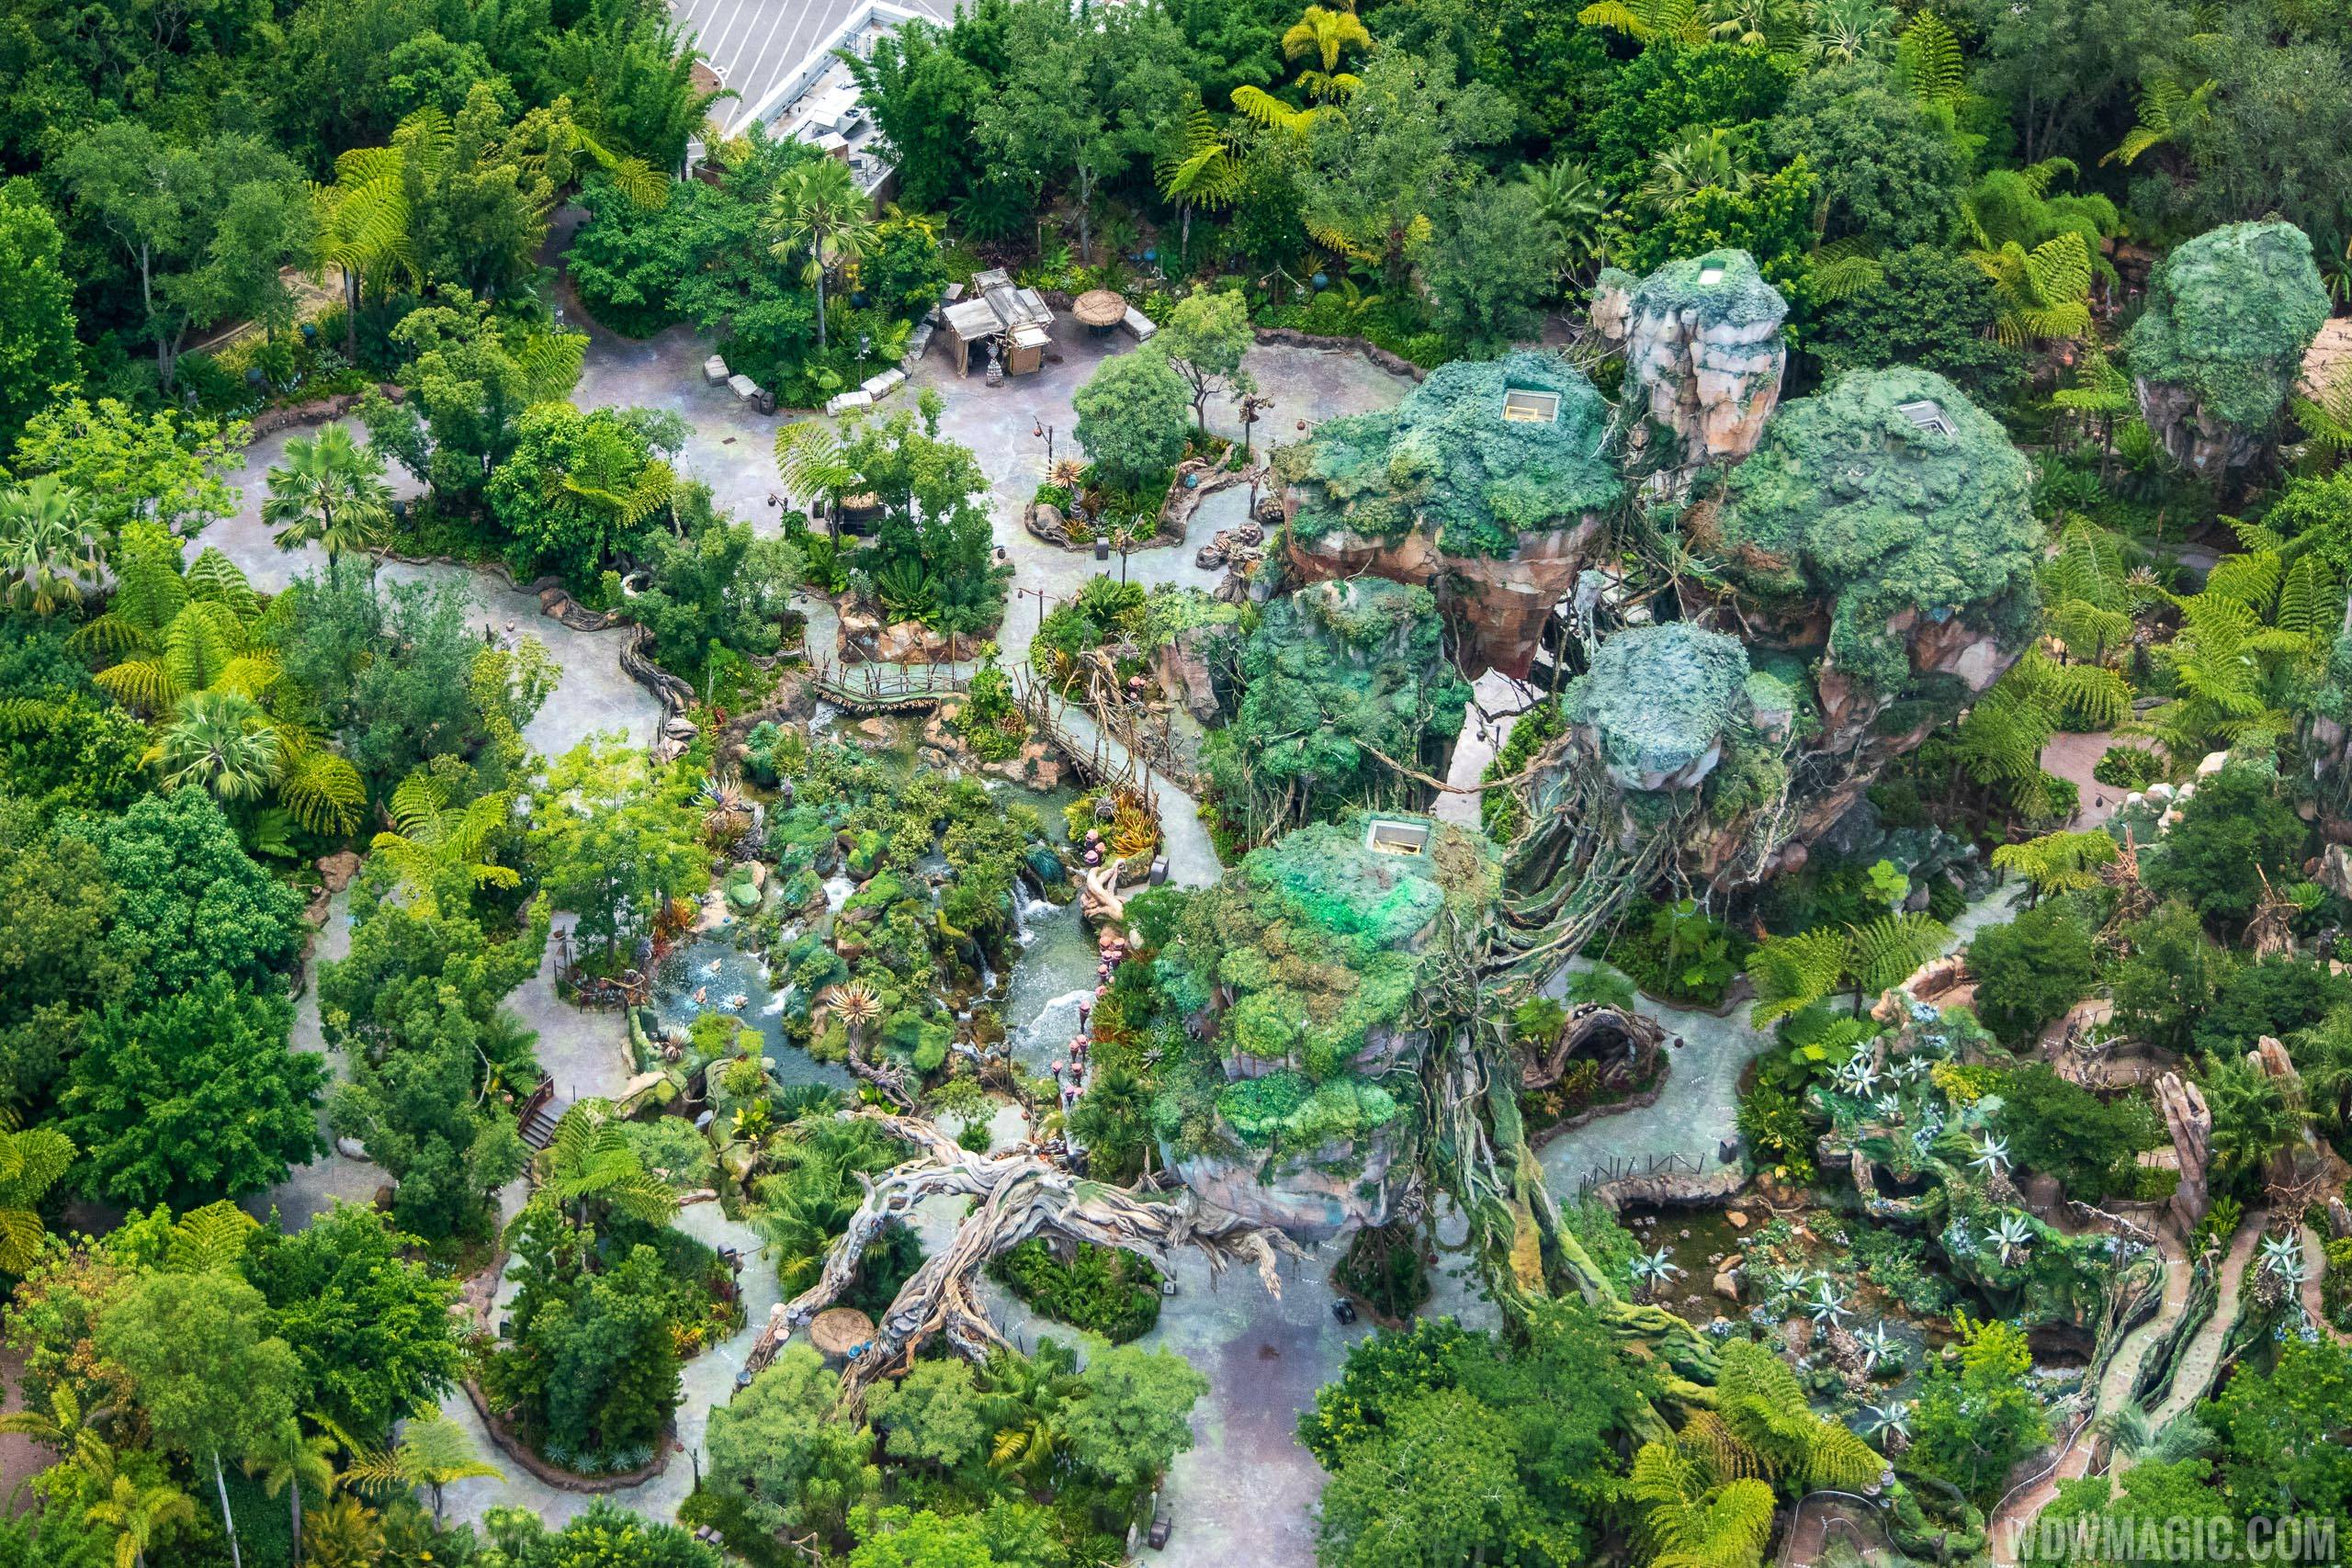 Disney's Animal Kingdom gains extra time at opening and close